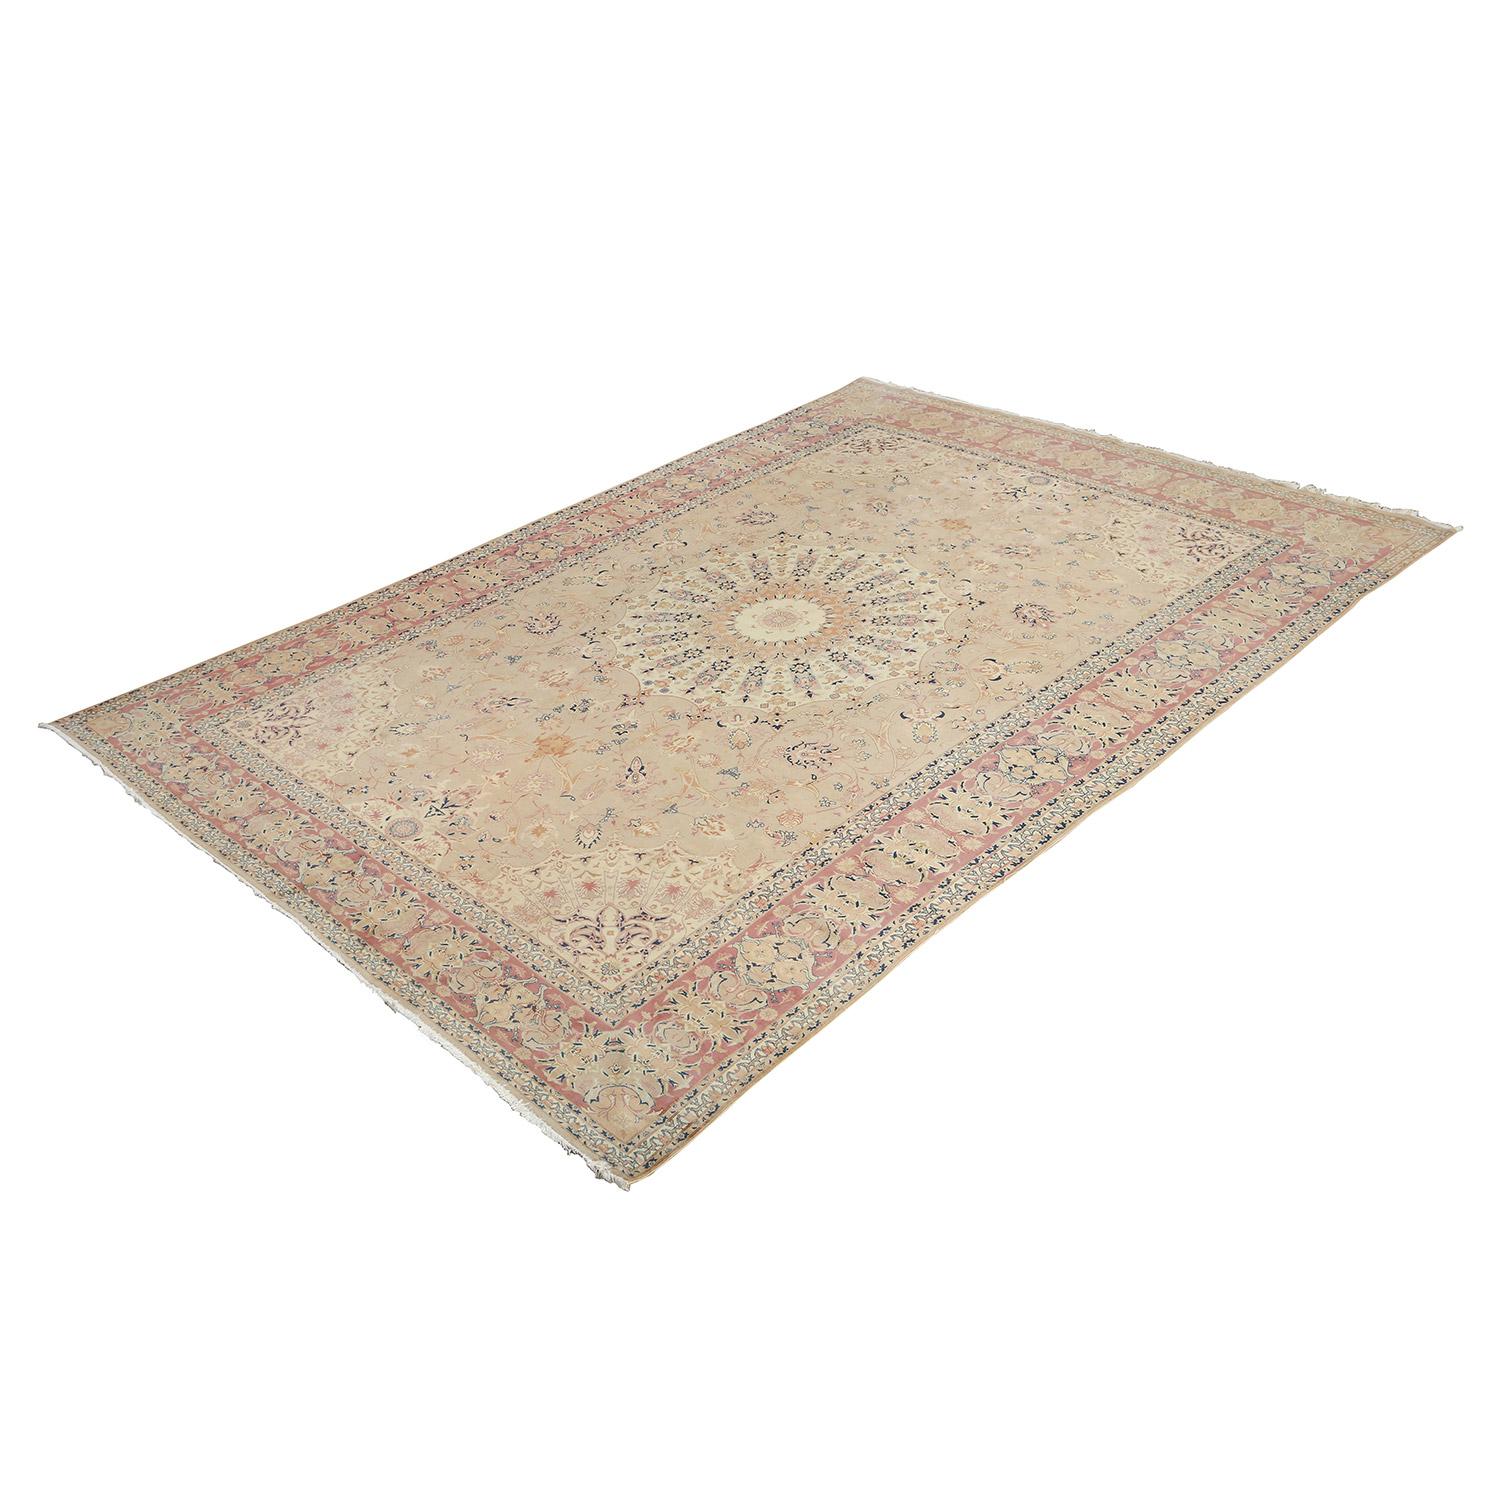 This vintage Tabriz Emad rug, with a history spanning approximately 60 years, is a testament to the enduring beauty of Persian weaving traditions. Crafted with a cotton foundation and a luxuriously soft wool pile, it embodies the essence of both